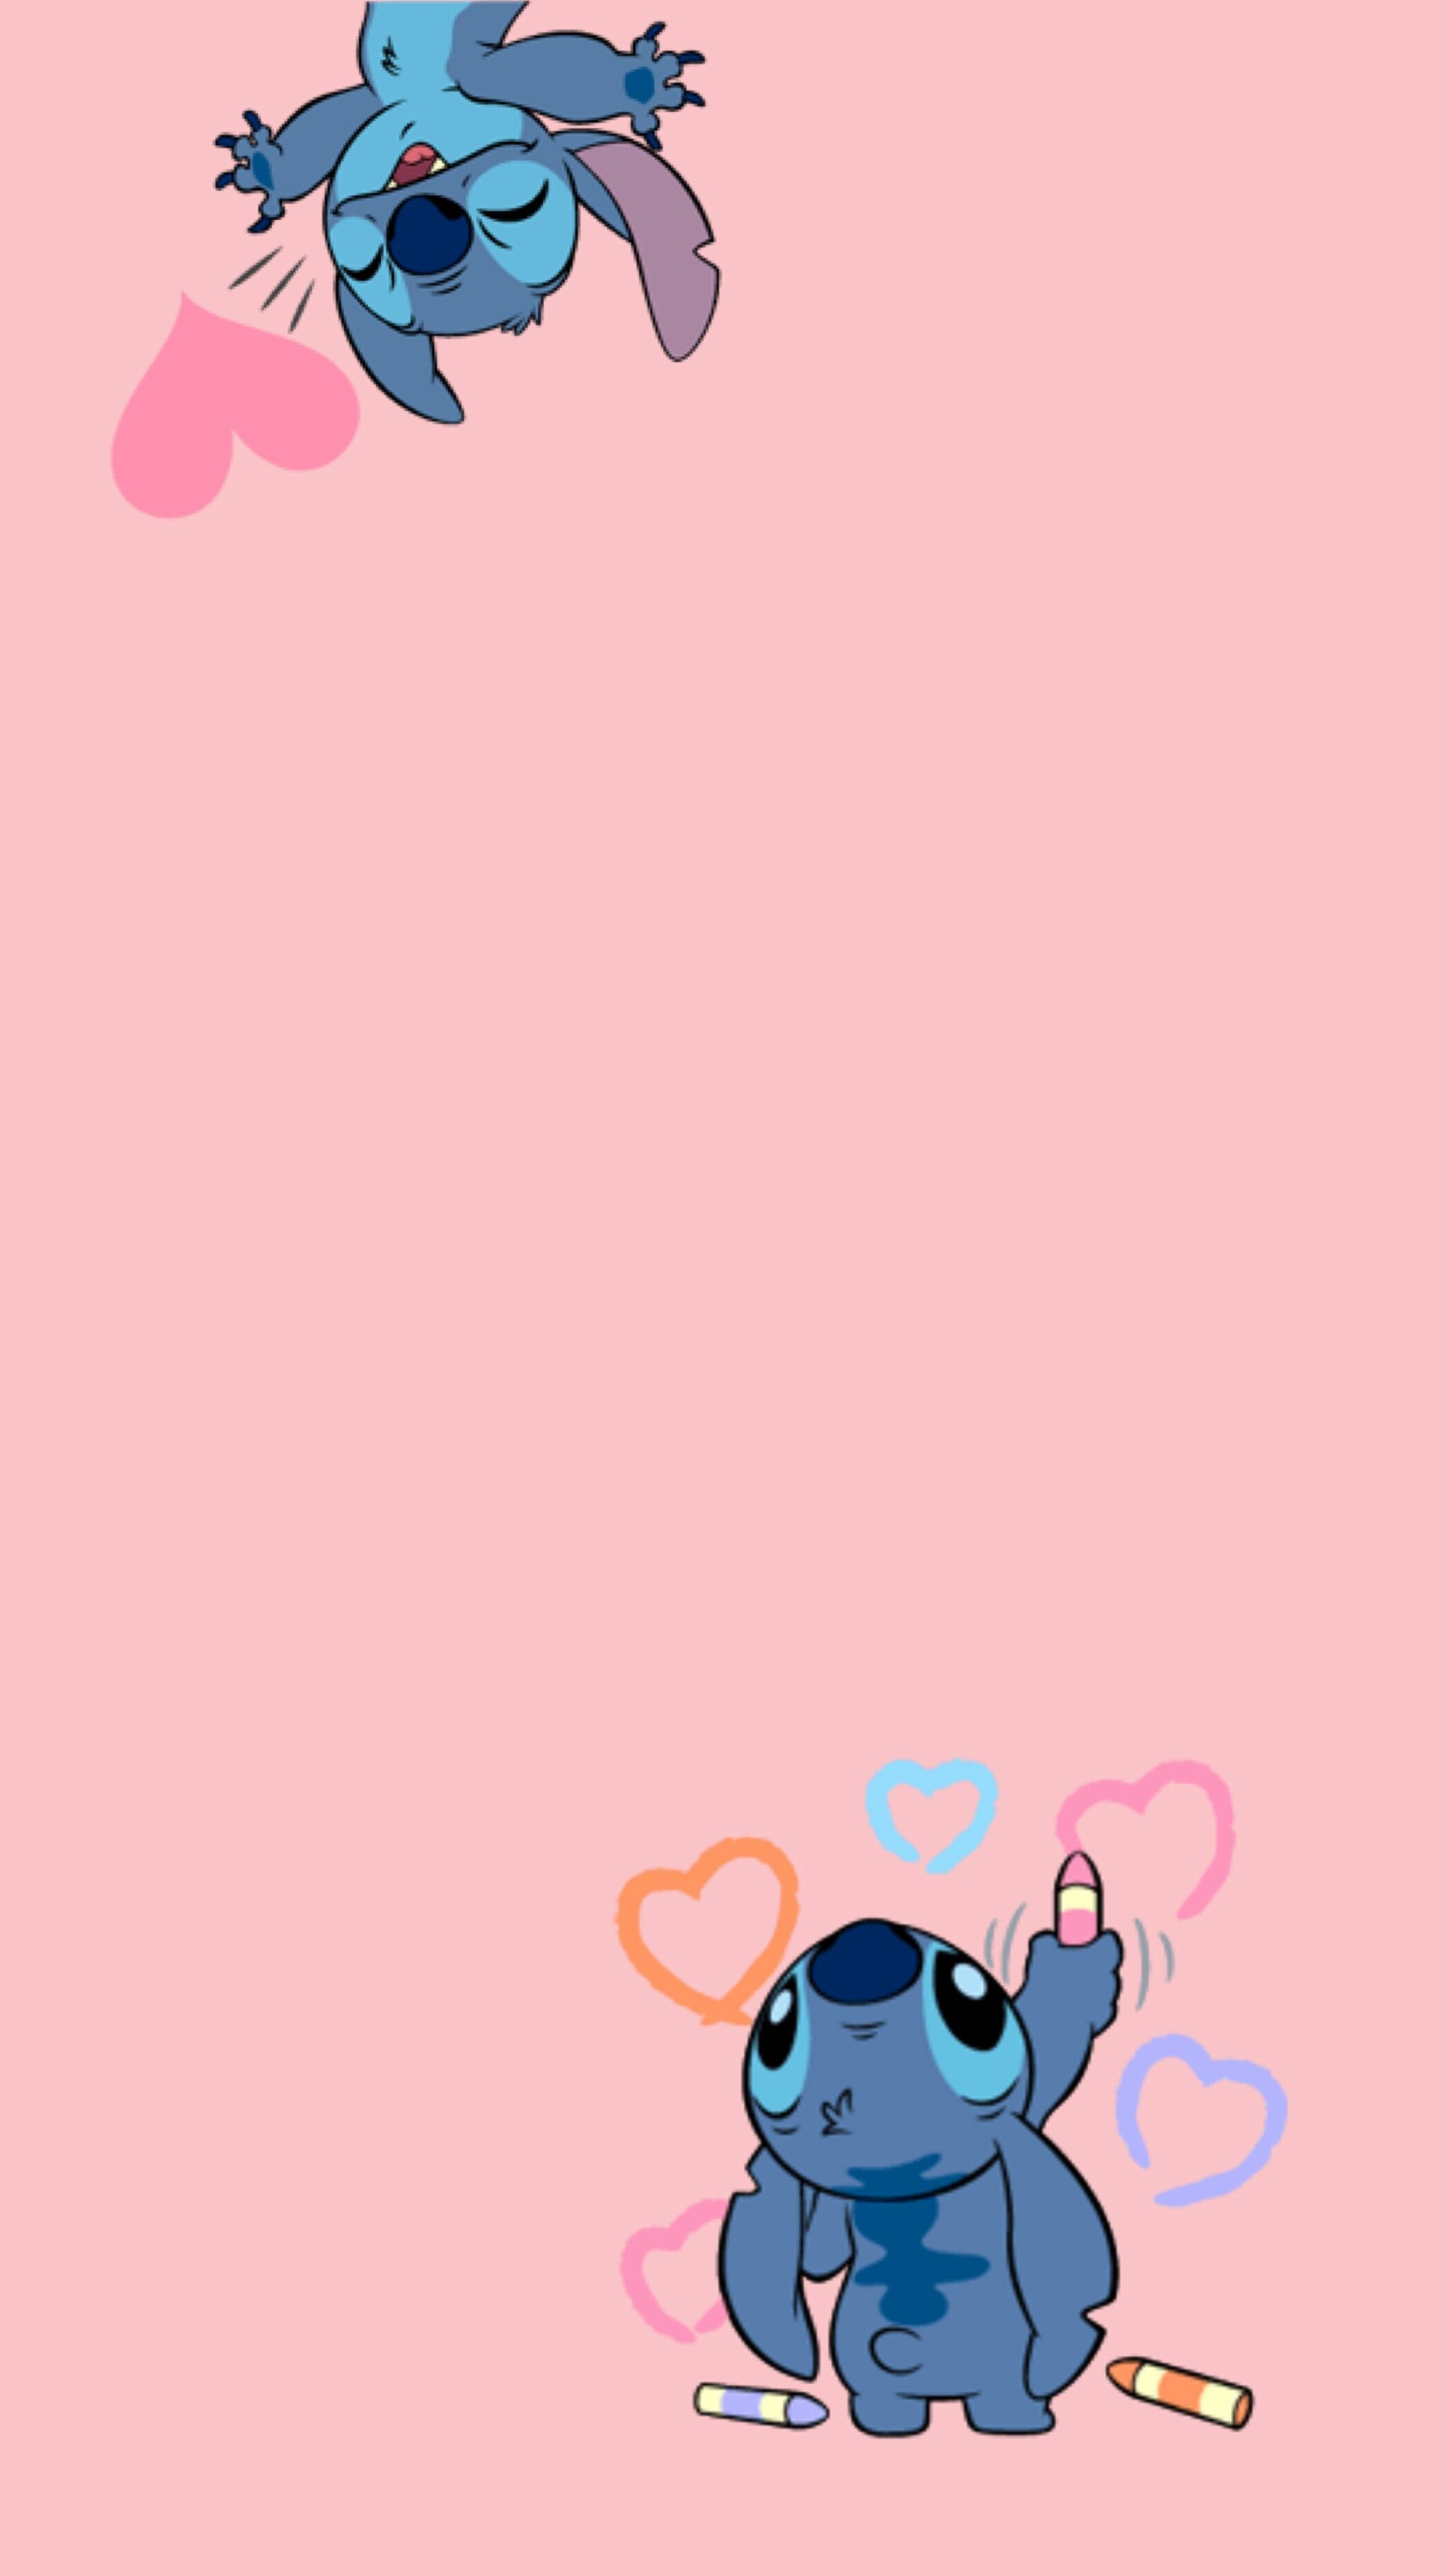 Lilo and Stitch: A Disney media franchise that commenced in 2002 with the release of the animated film of the same name. 2100x3730 HD Wallpaper.